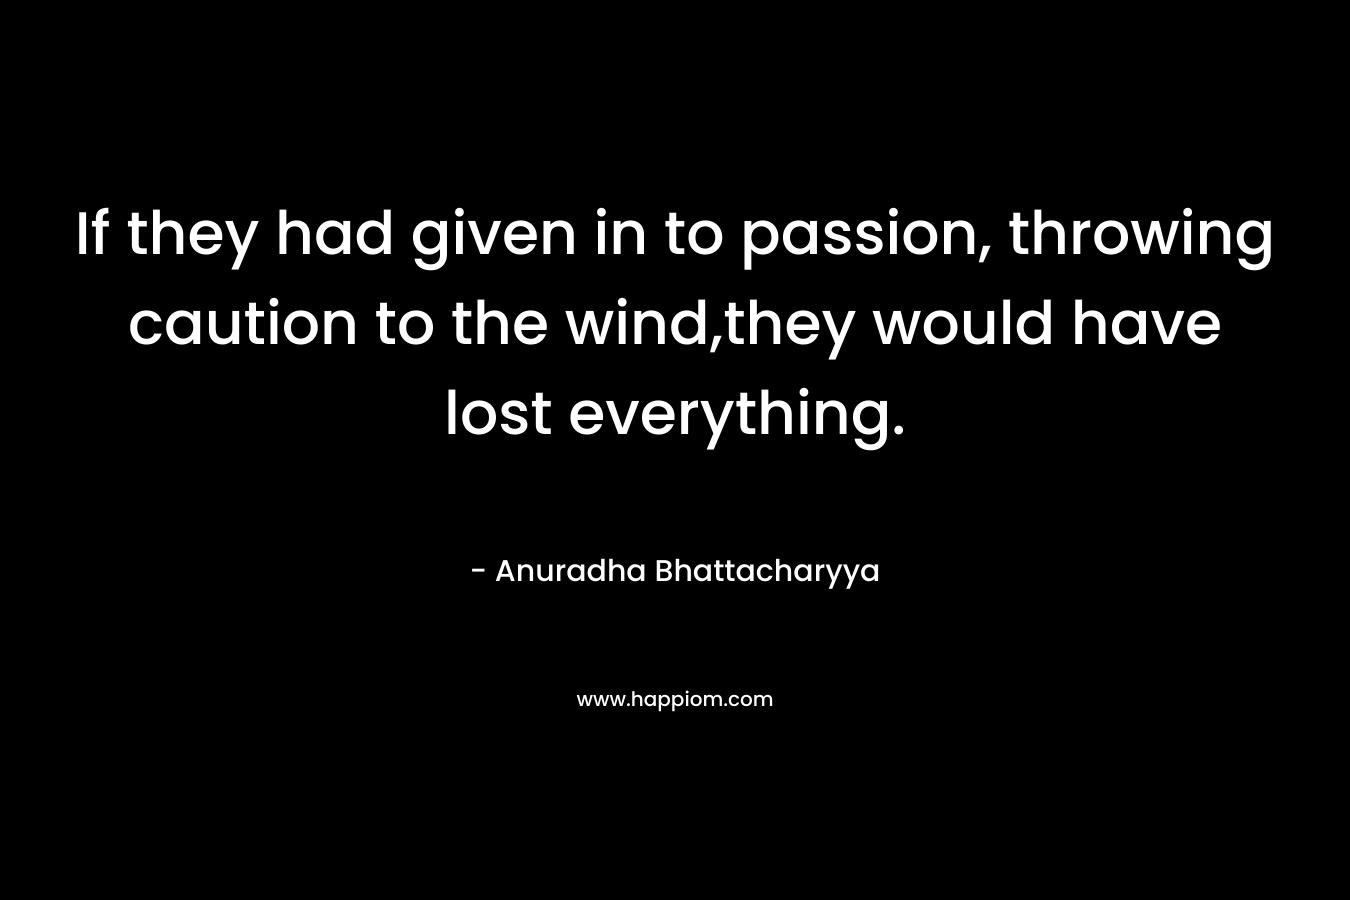 If they had given in to passion, throwing caution to the wind,they would have lost everything. – Anuradha Bhattacharyya